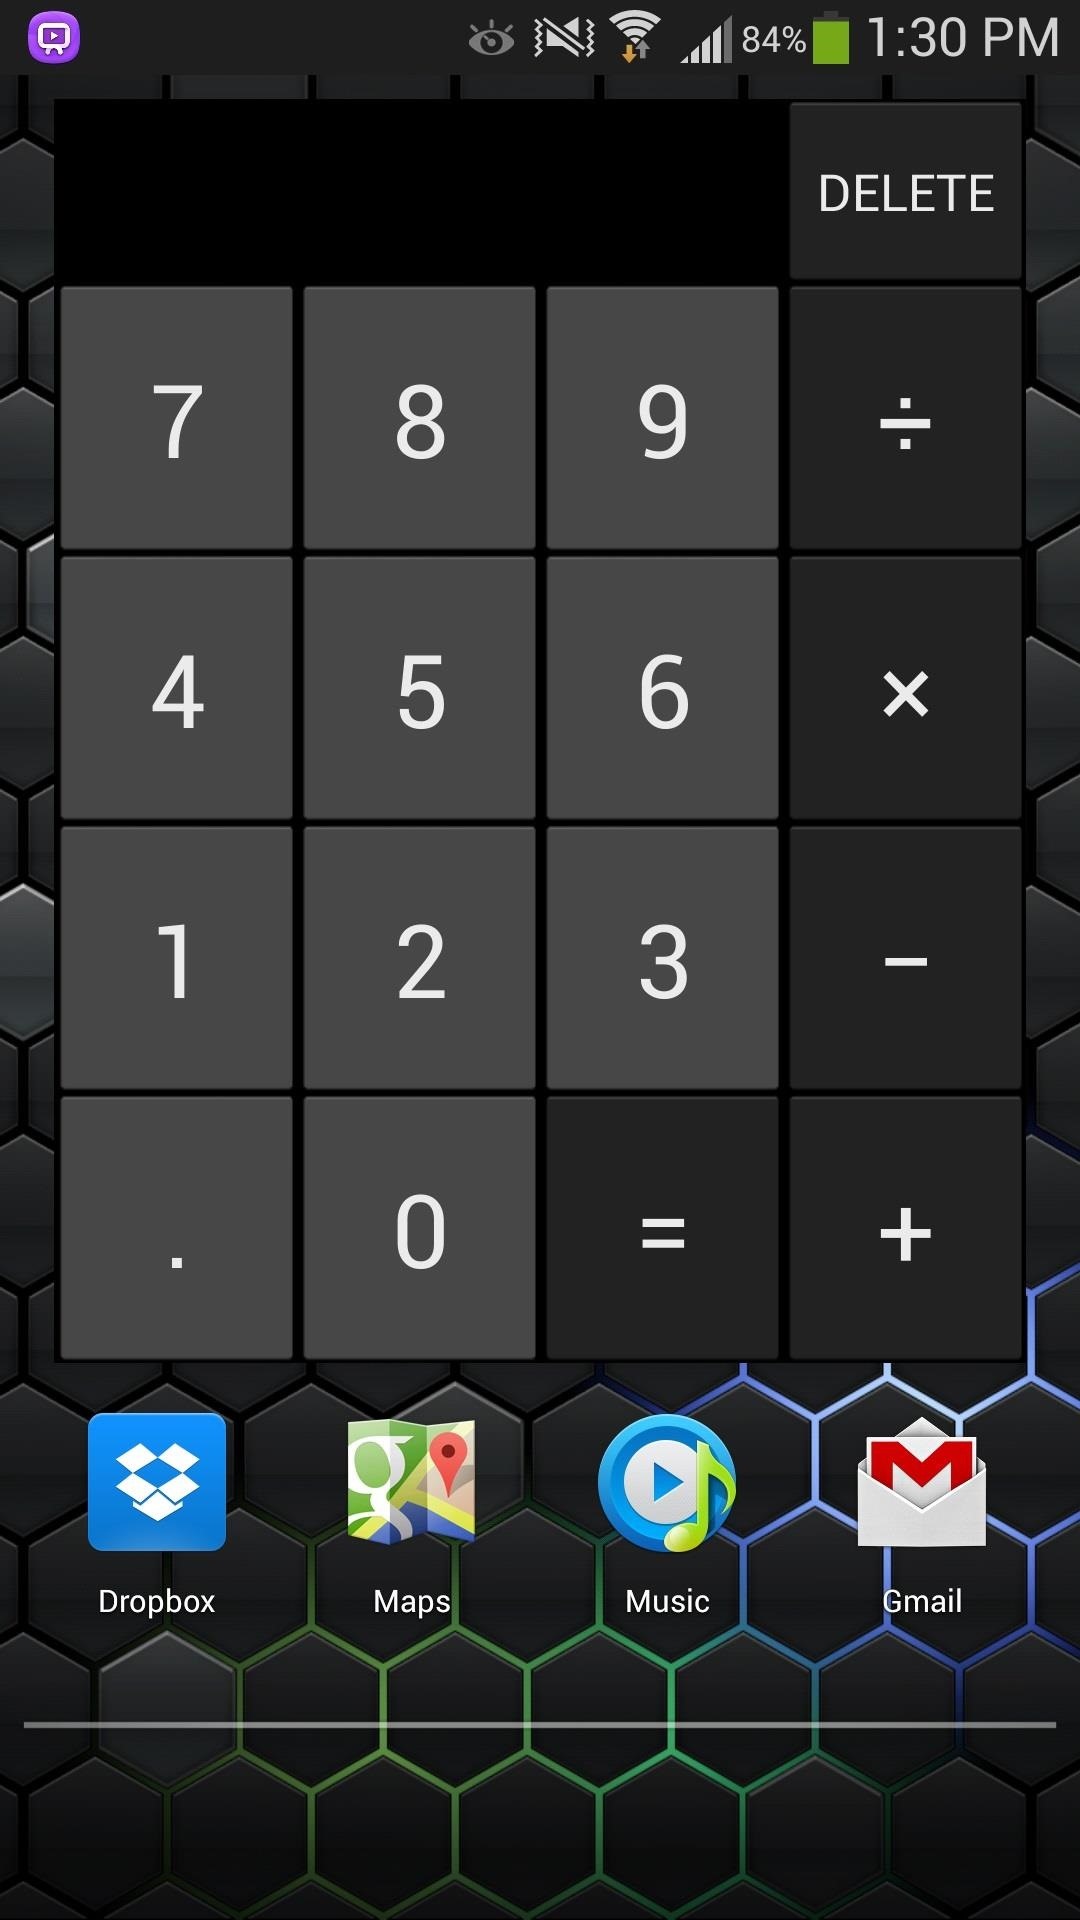 How to Get CyanogenMod's Sleek Graphing Calculator & Widget on Your Samsung Galaxy S4 Without Rooting